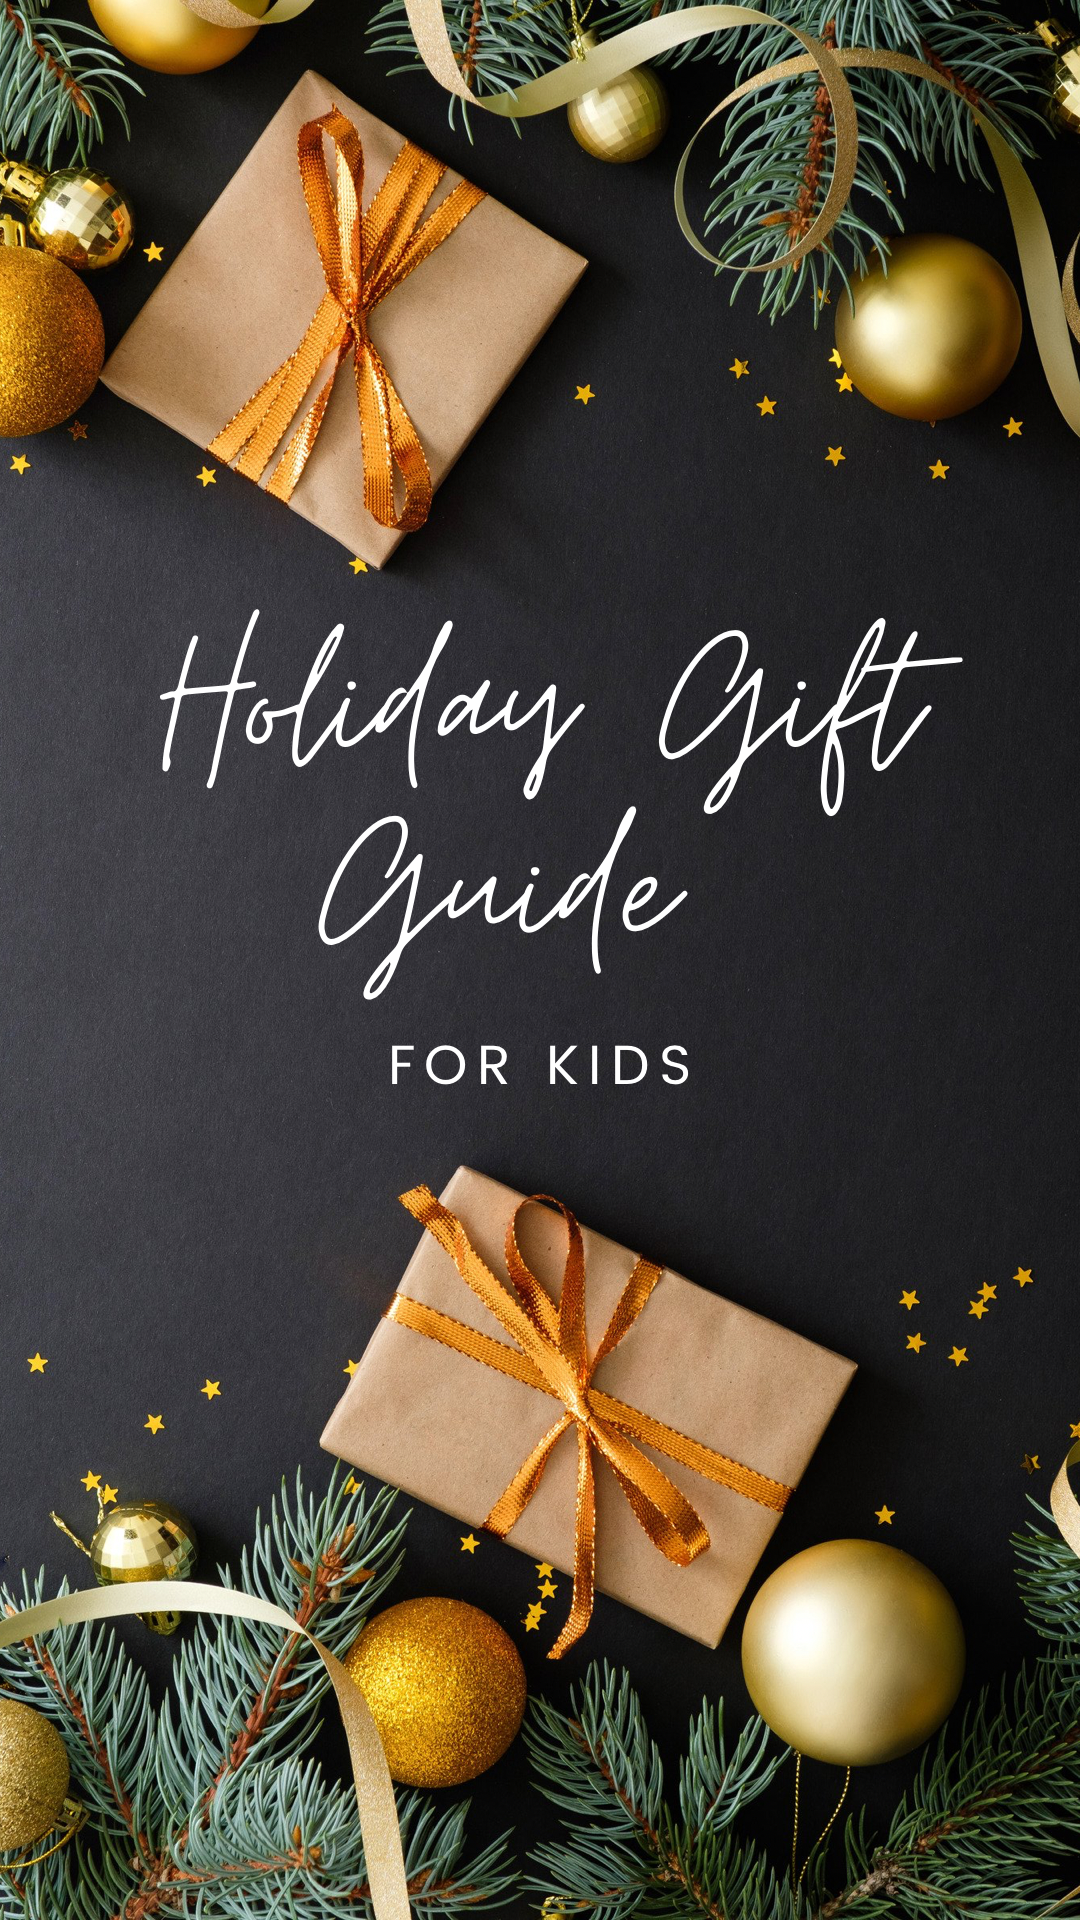 Holiday Gift Guides for Kids #giftguide #giftsforher #giftsforhim #giftsforkids #holidaygiftguide #holiday #amazon #boardgames #toys